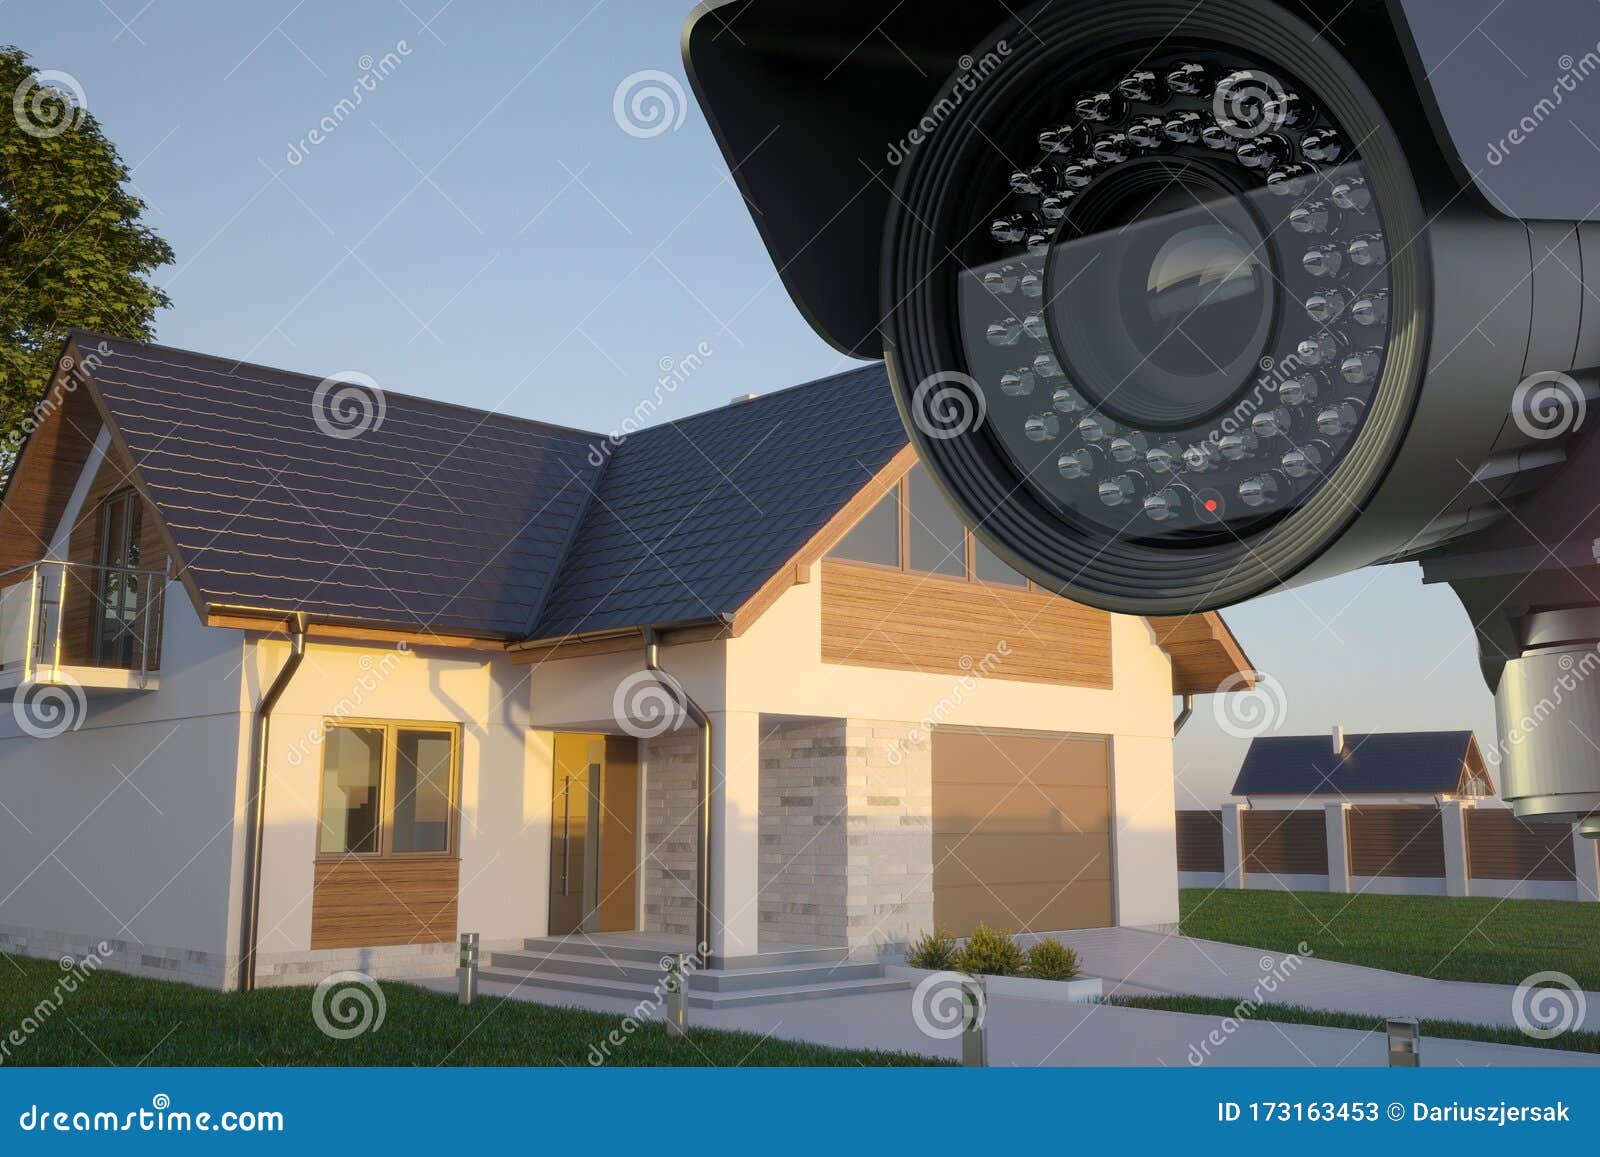 cctv for house security